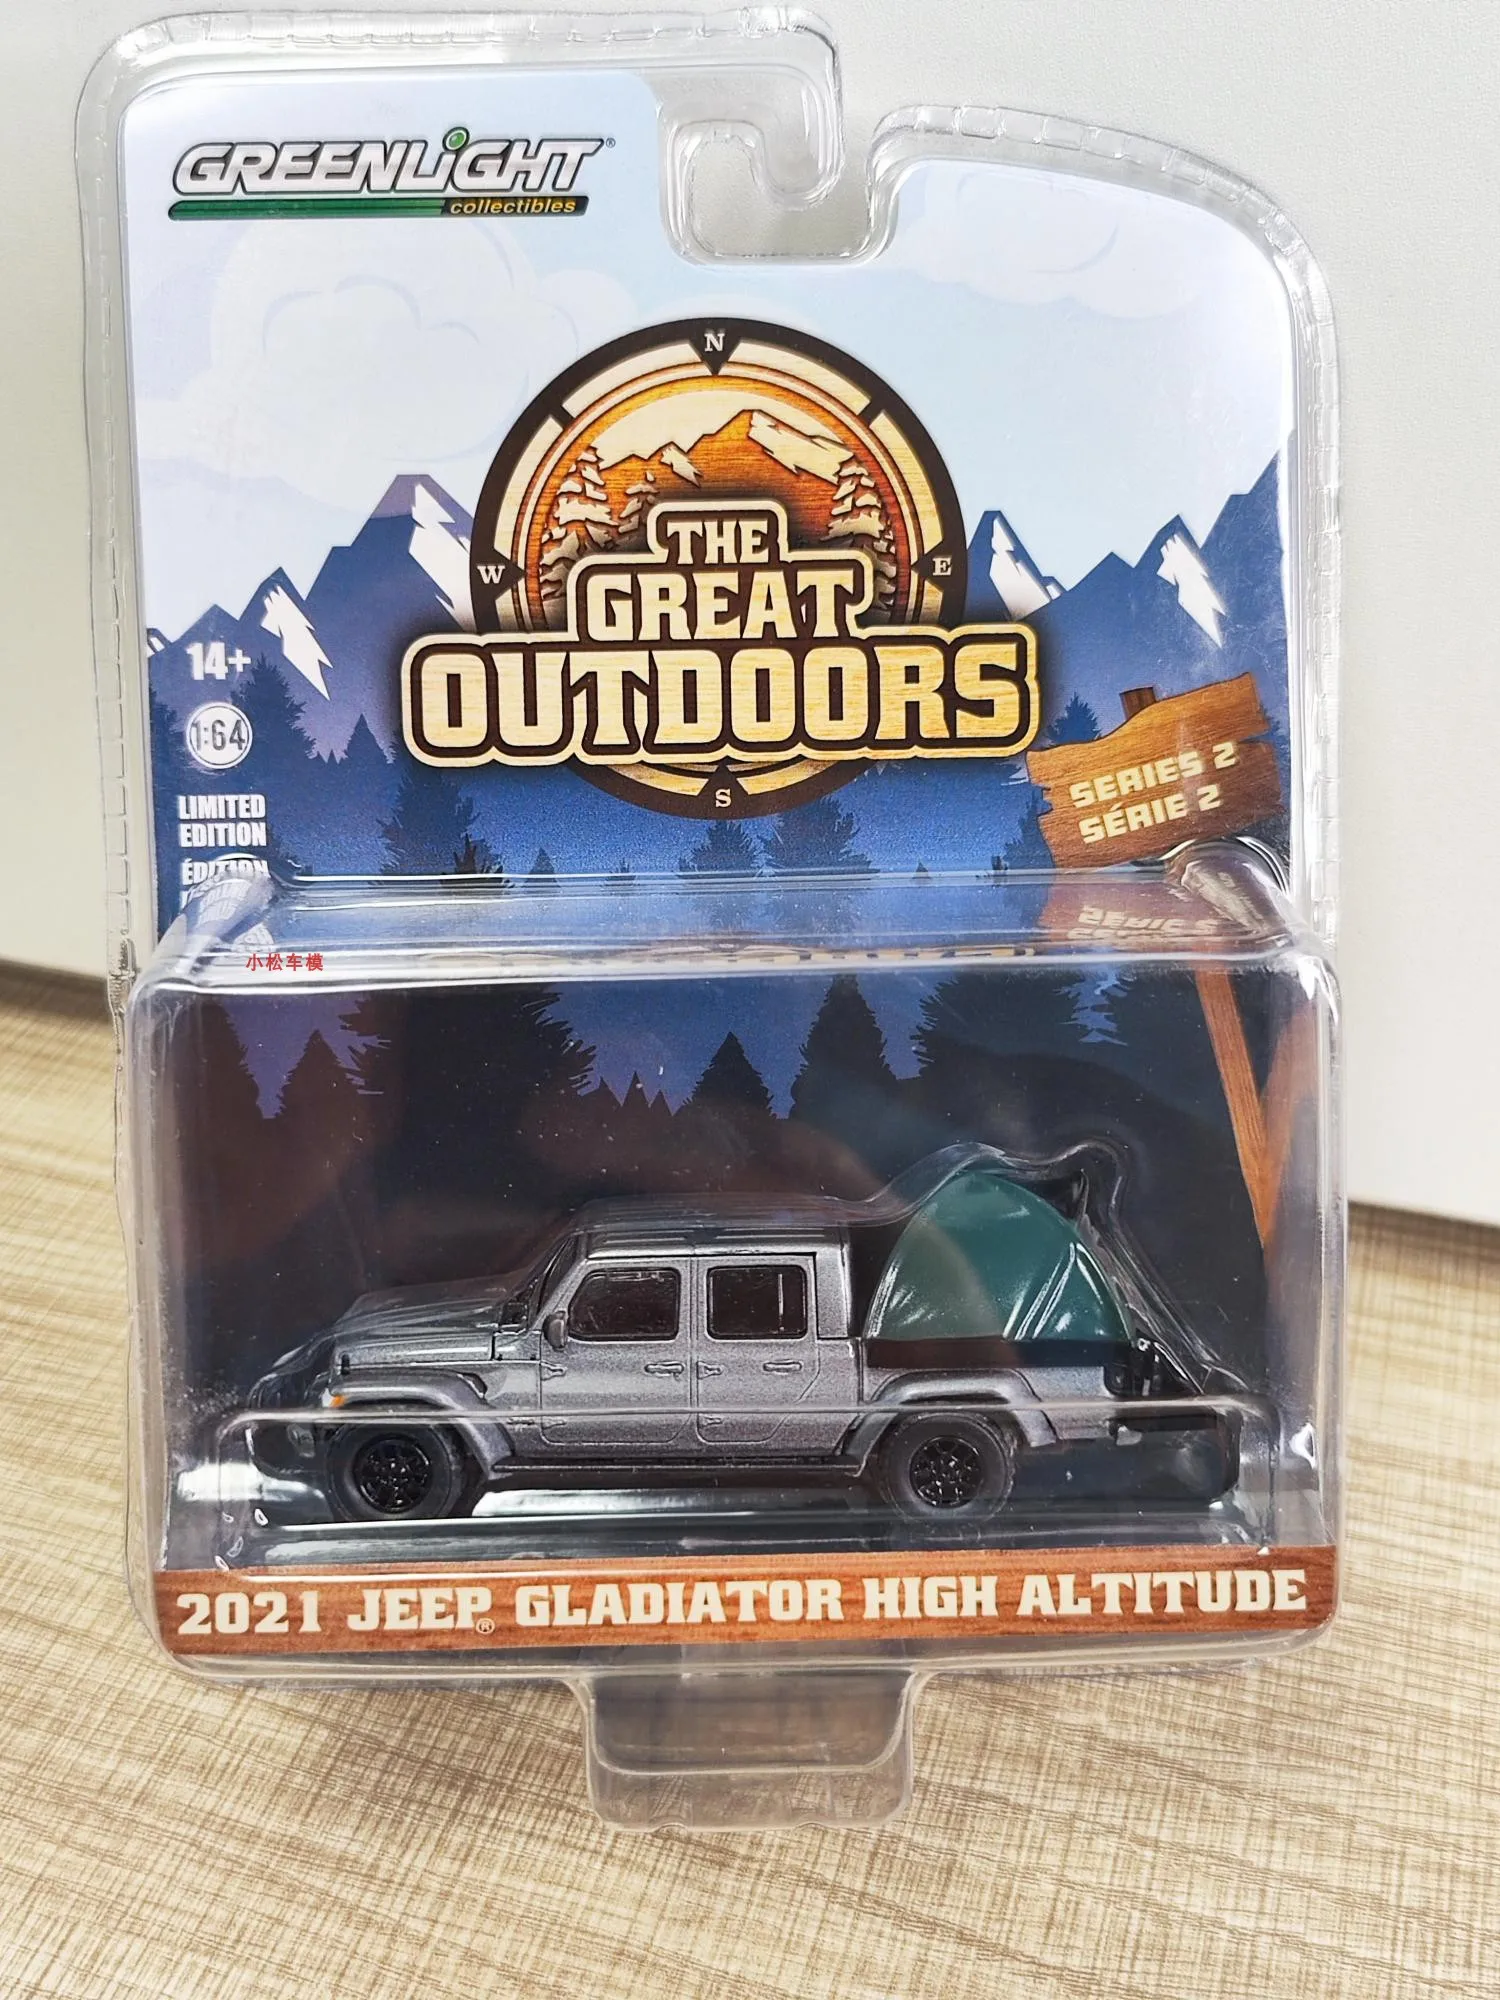 

1/64 Scale Diecast Car Model Toys 2021 Jeep Gladiator High Altitude Pickup Truck GreenLight Die-Cast Metal Vehicle For Gift Kids